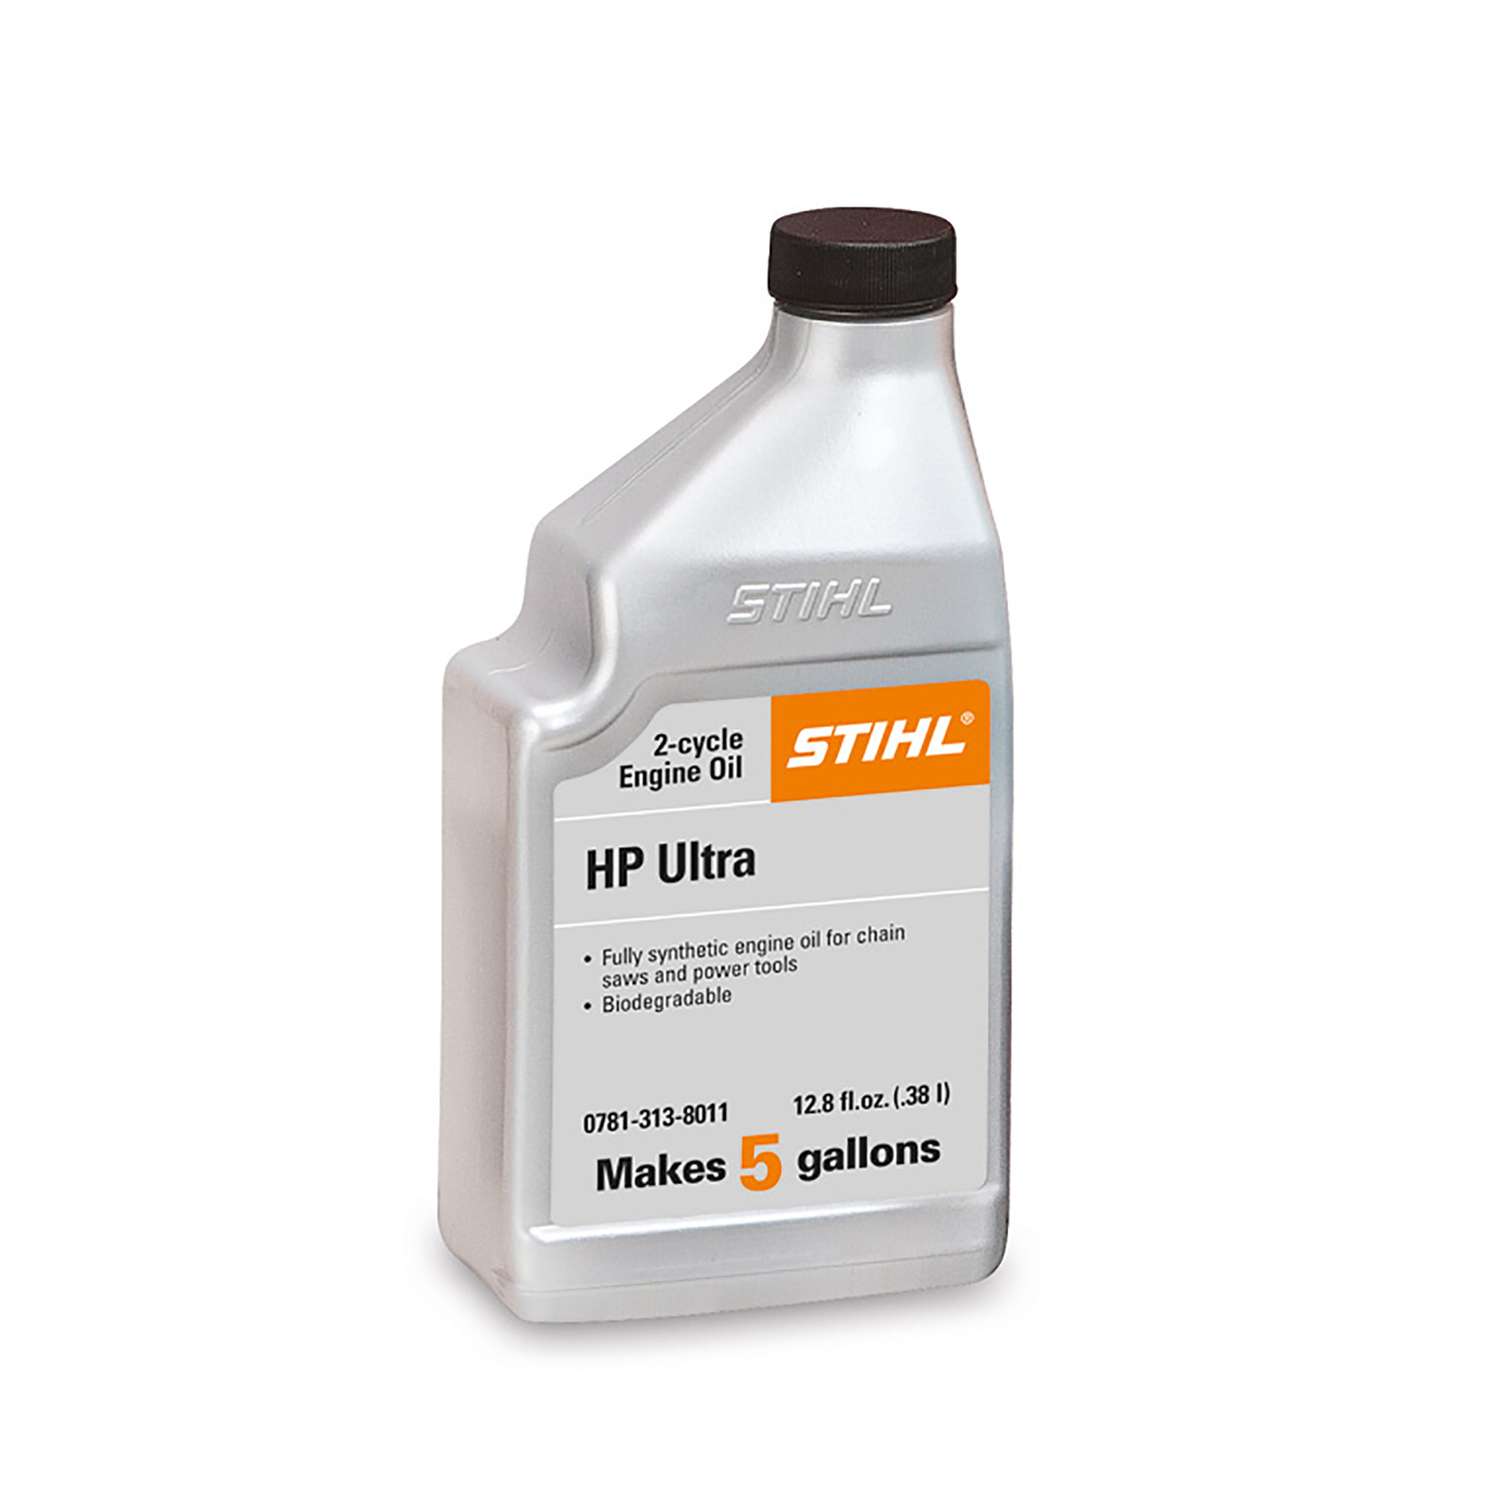 Oil Mixture STIHL HP Ultra for 2 Stroke Engines Brushcutters/chainsaws 